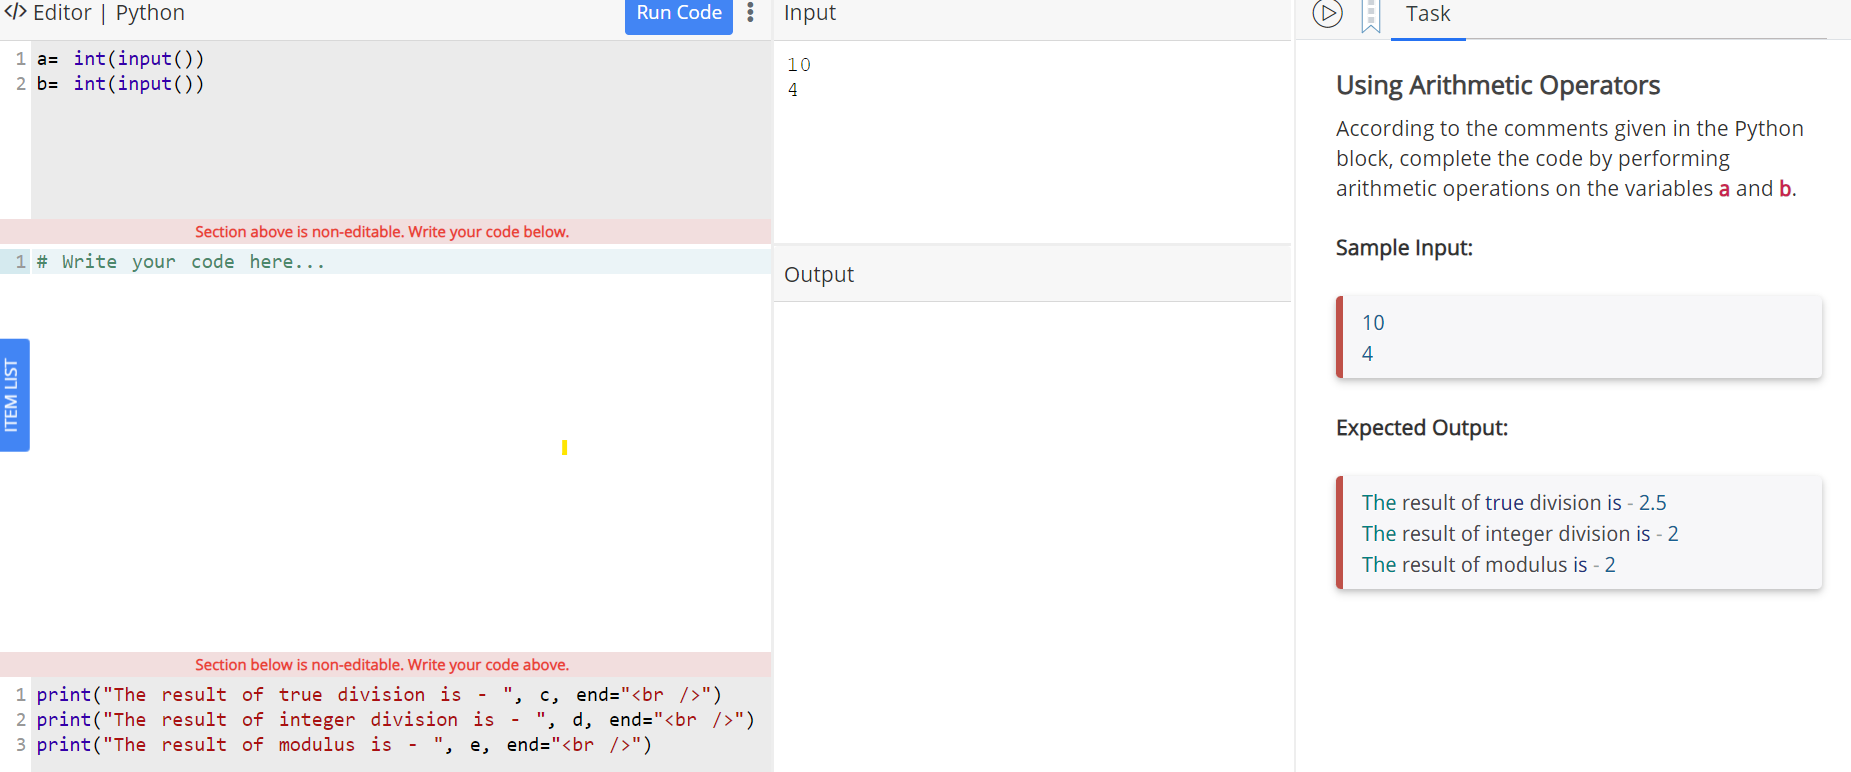 Editor | Python 1 a= int(input()) 2 b= int(input()) Section above is non-editable. Write your code below. 1 #